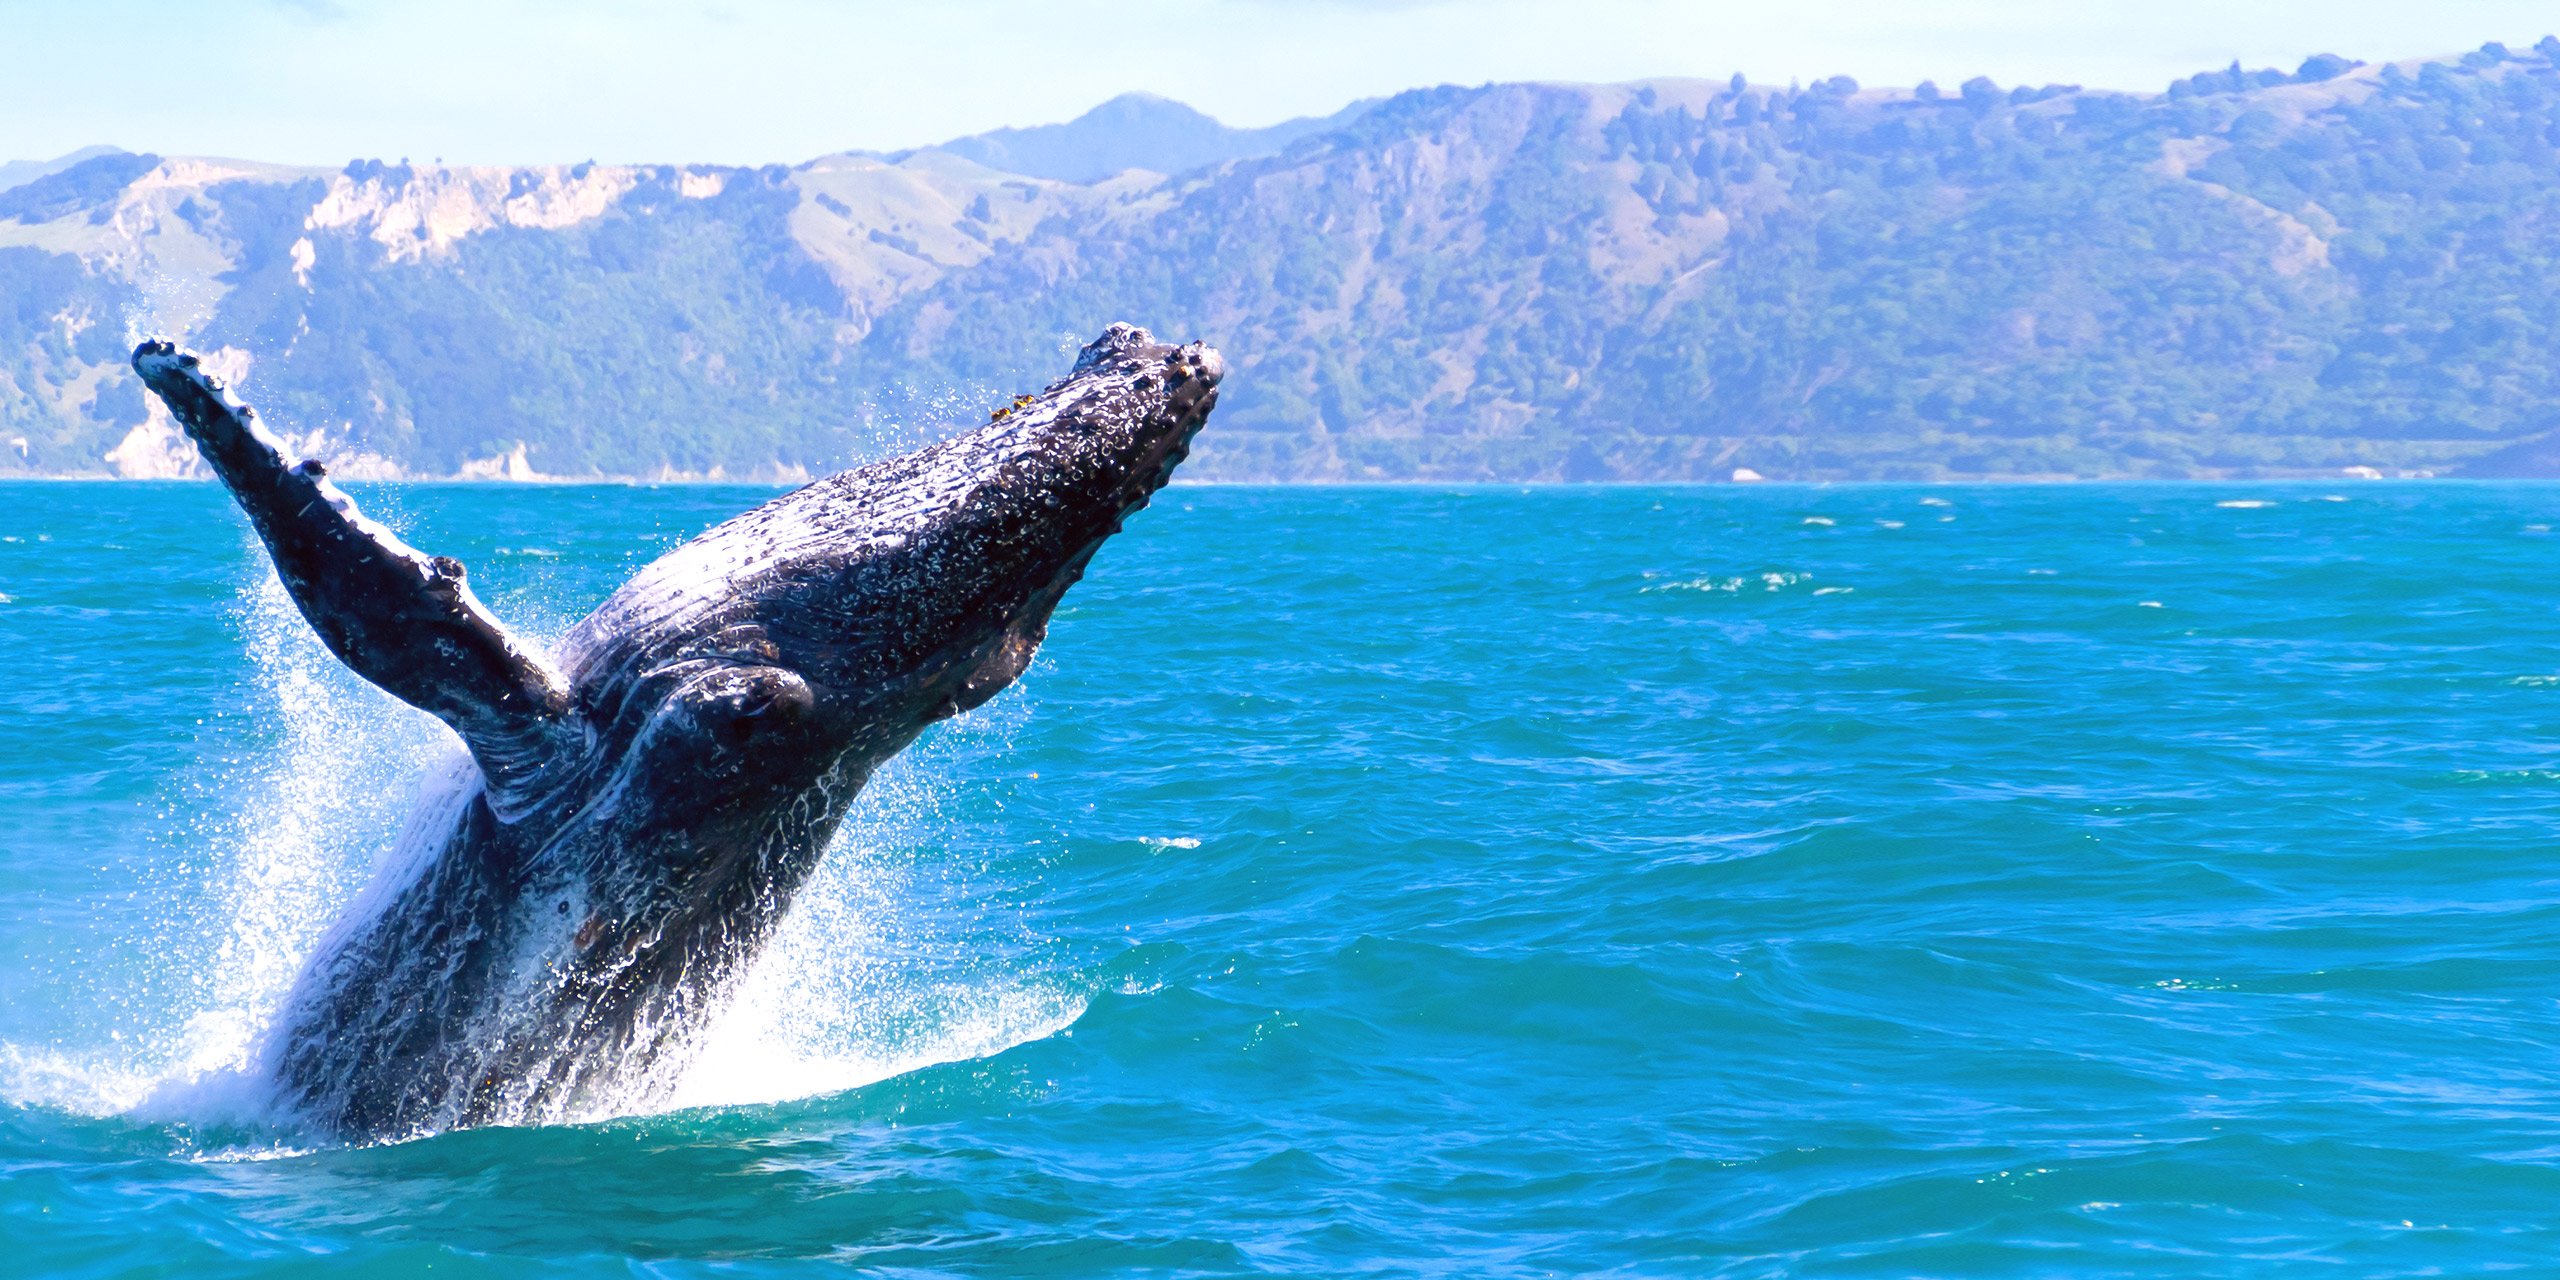 Humpback whale fluke breaching out of water